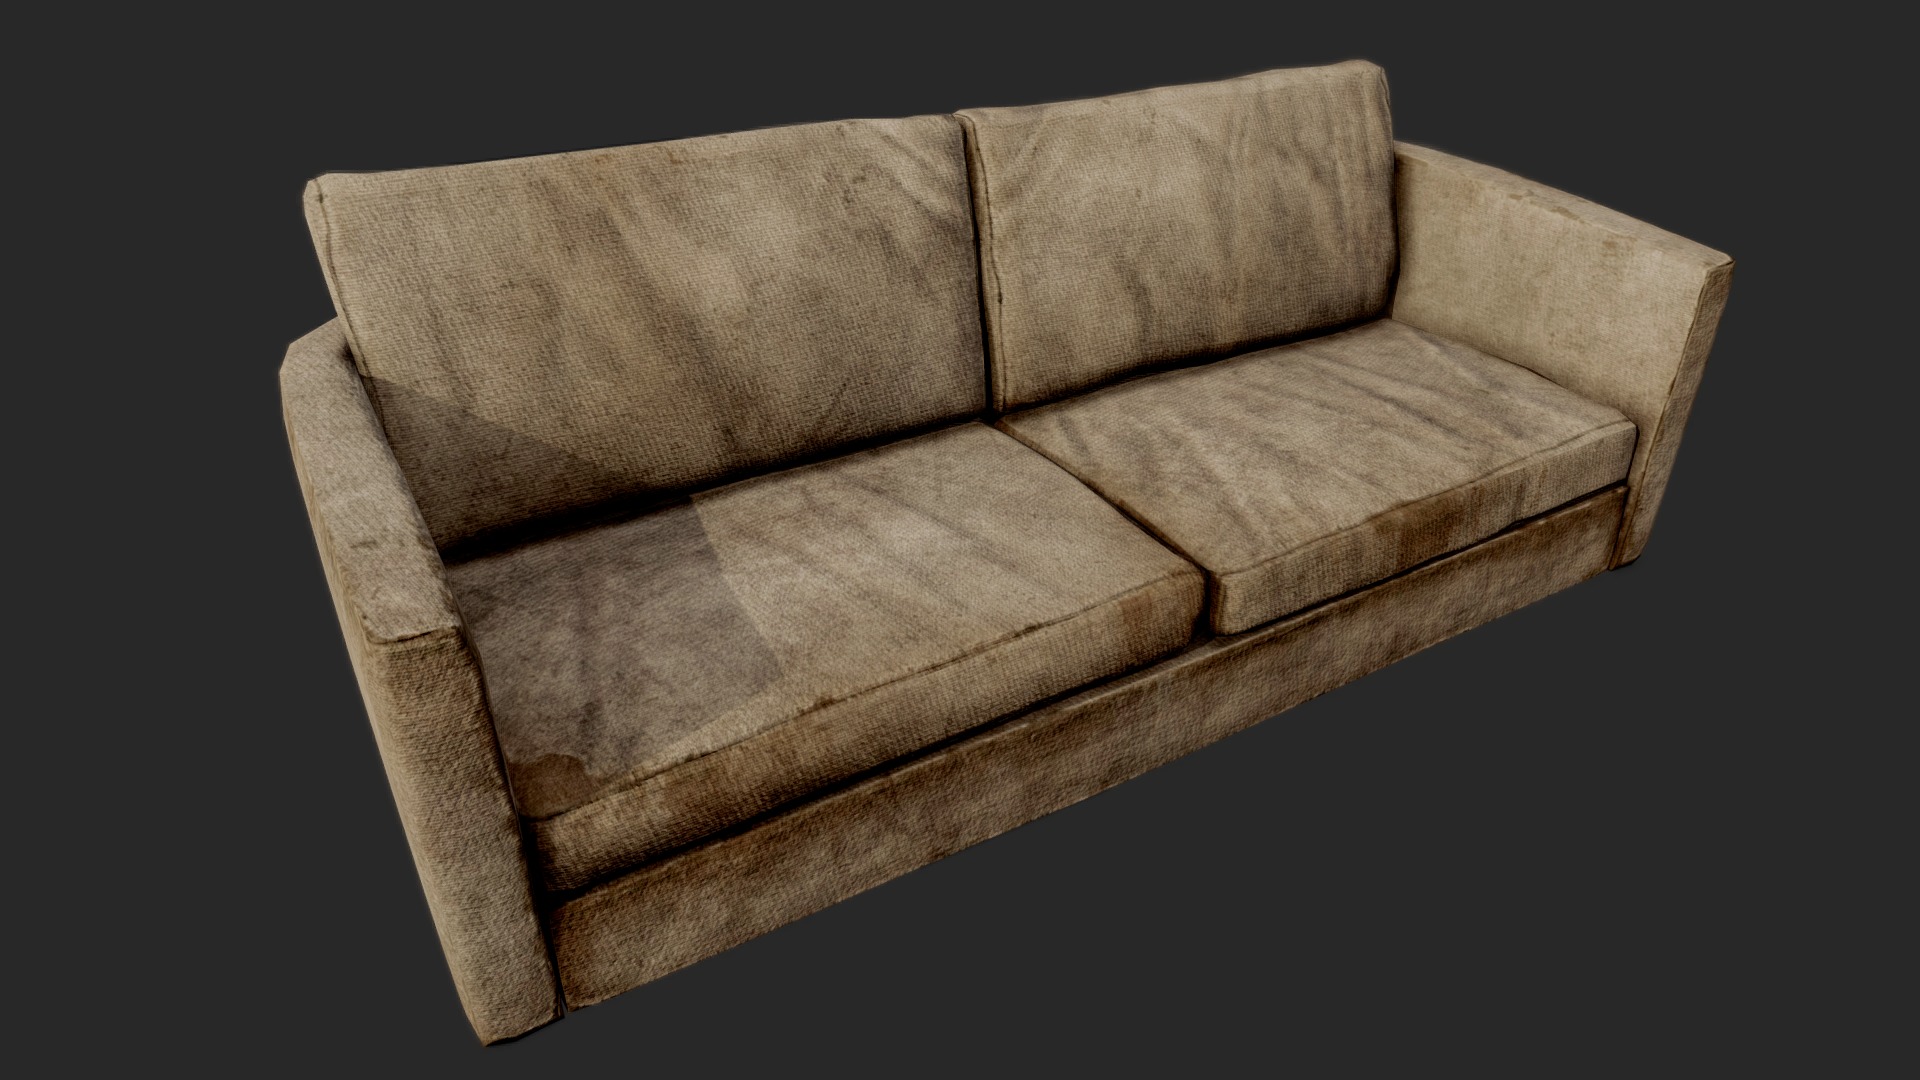 3D model Old Dirty Couch 02 Old Cotton – PBR - This is a 3D model of the Old Dirty Couch 02 Old Cotton - PBR. The 3D model is about a brown rectangle with a black background.